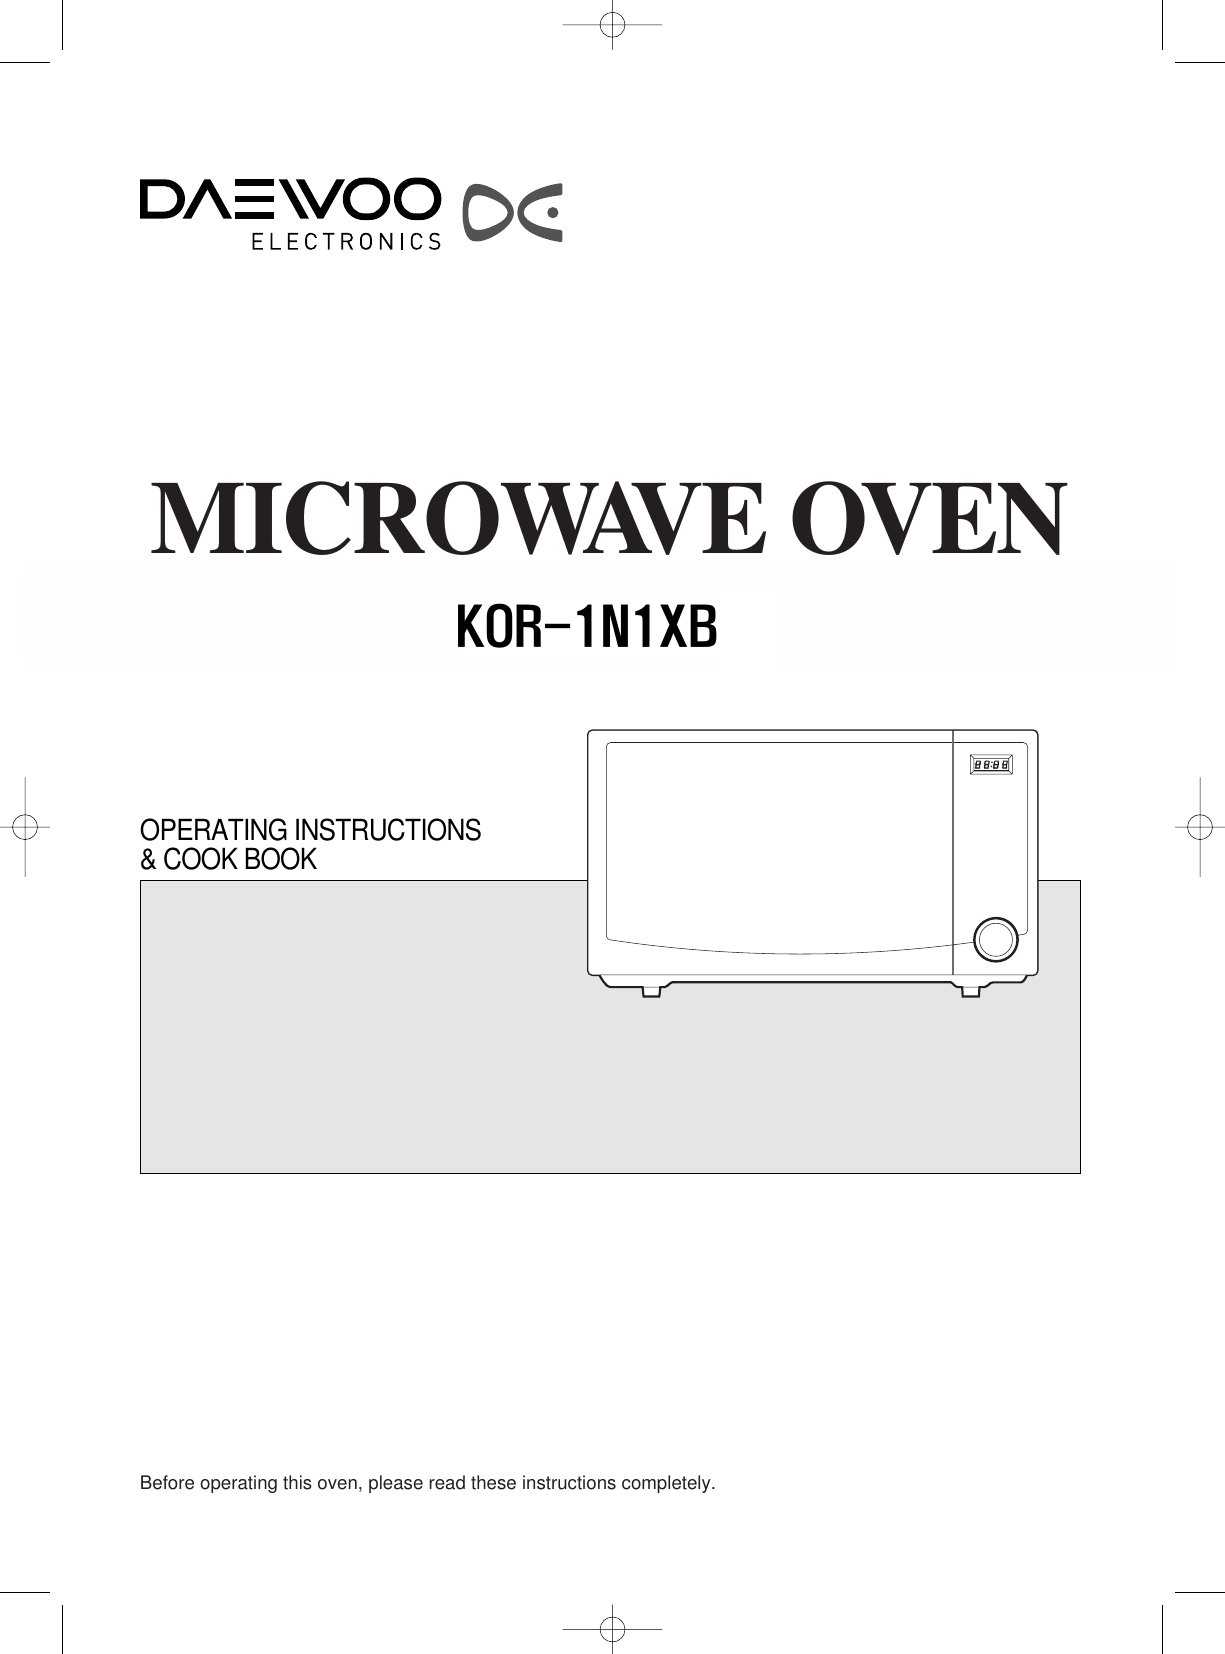 Before operating this oven, please read these instructions completely.OPERATING INSTRUCTIONS&amp; COOK BOOKMICROWAVE OVENKOR-1N1A9ANRU04Q4[ED